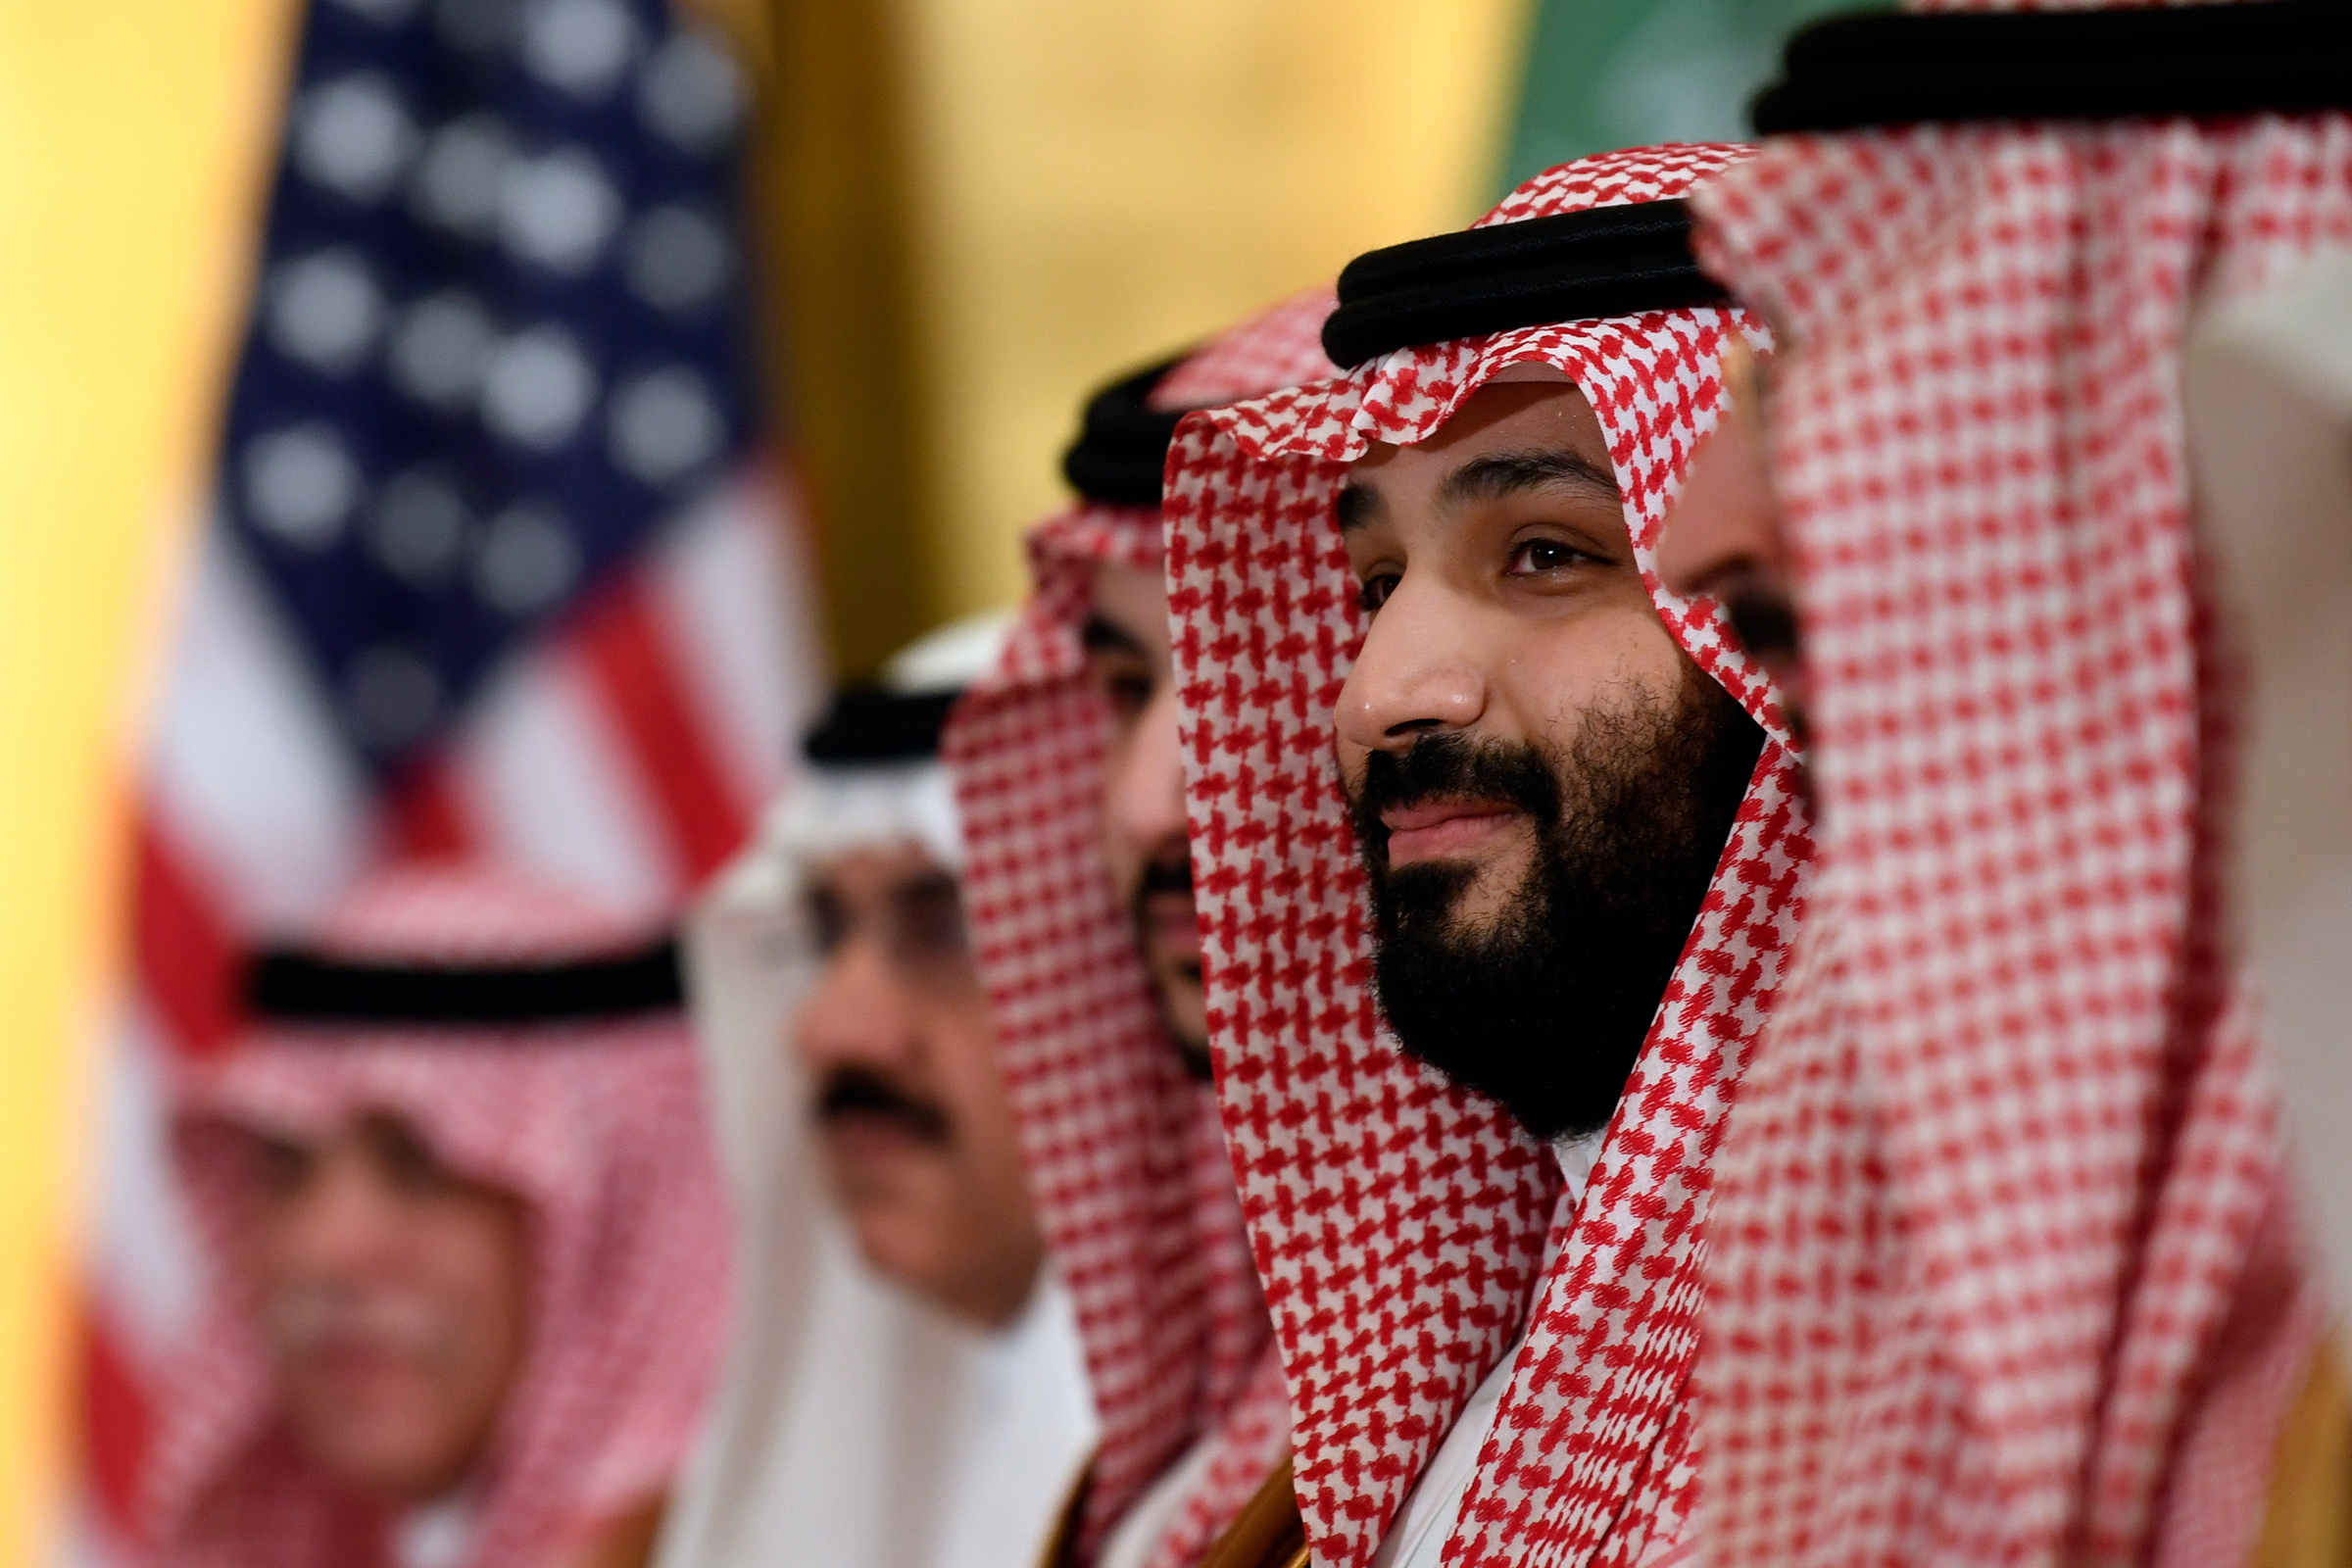 In this June 29, 2019 photo, Saudi Arabia's Crown Prince Mohammed bin Salman listens during his meeting with President Donald Trump on the sidelines of the G-20 summit in Osaka, Japan (Susan Walsh—AP)